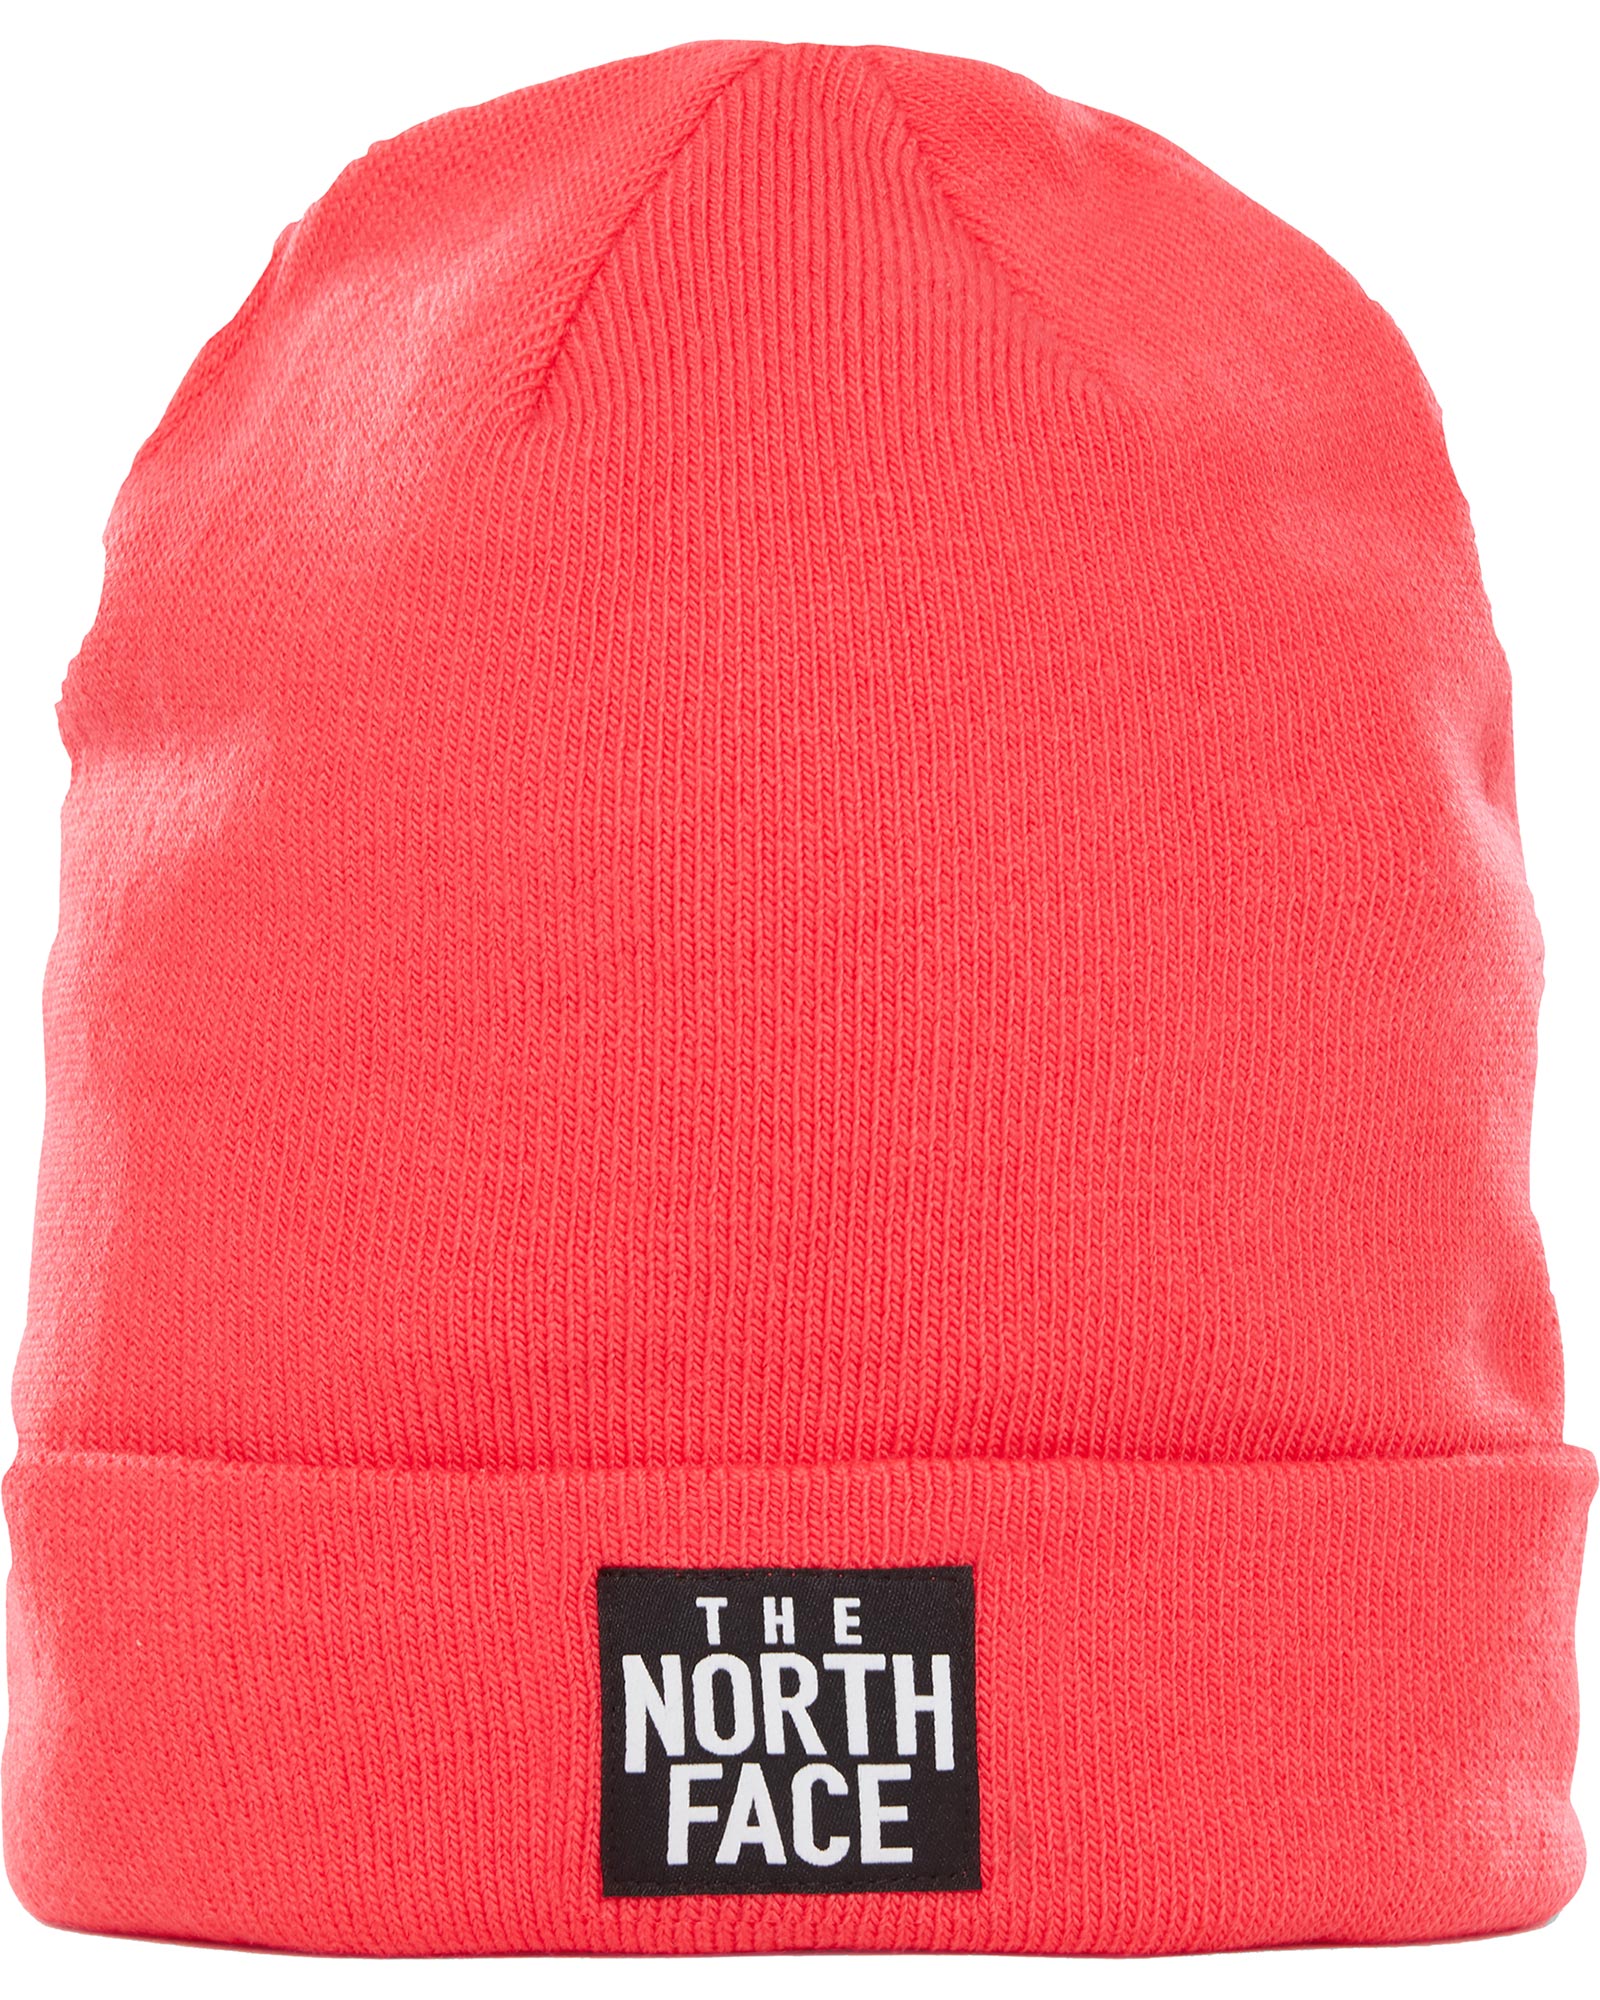 The North Face Dock Worker Beanie - Teaberry Pink